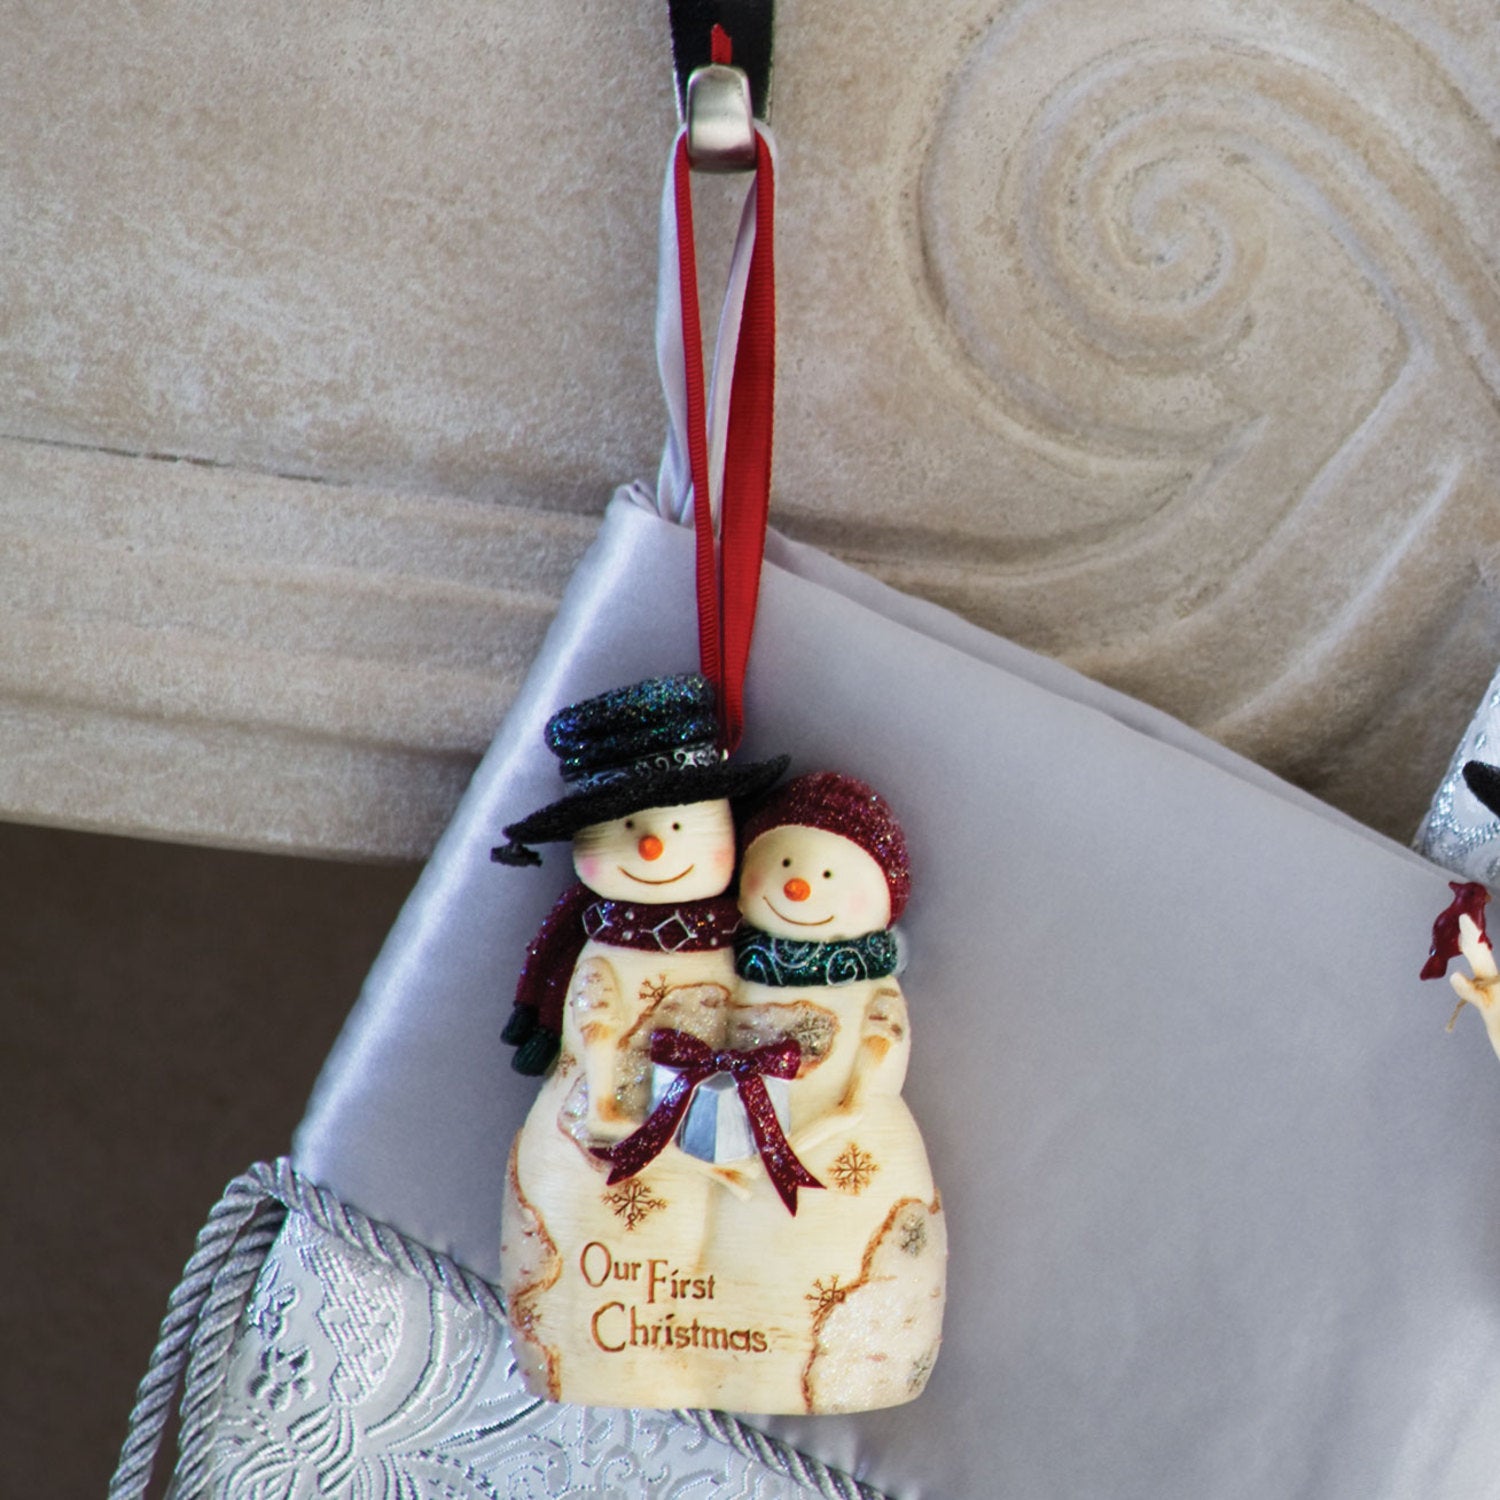 Our First Christmas Snow Couple Ornament Christmas Ornament - Beloved Gift Shop